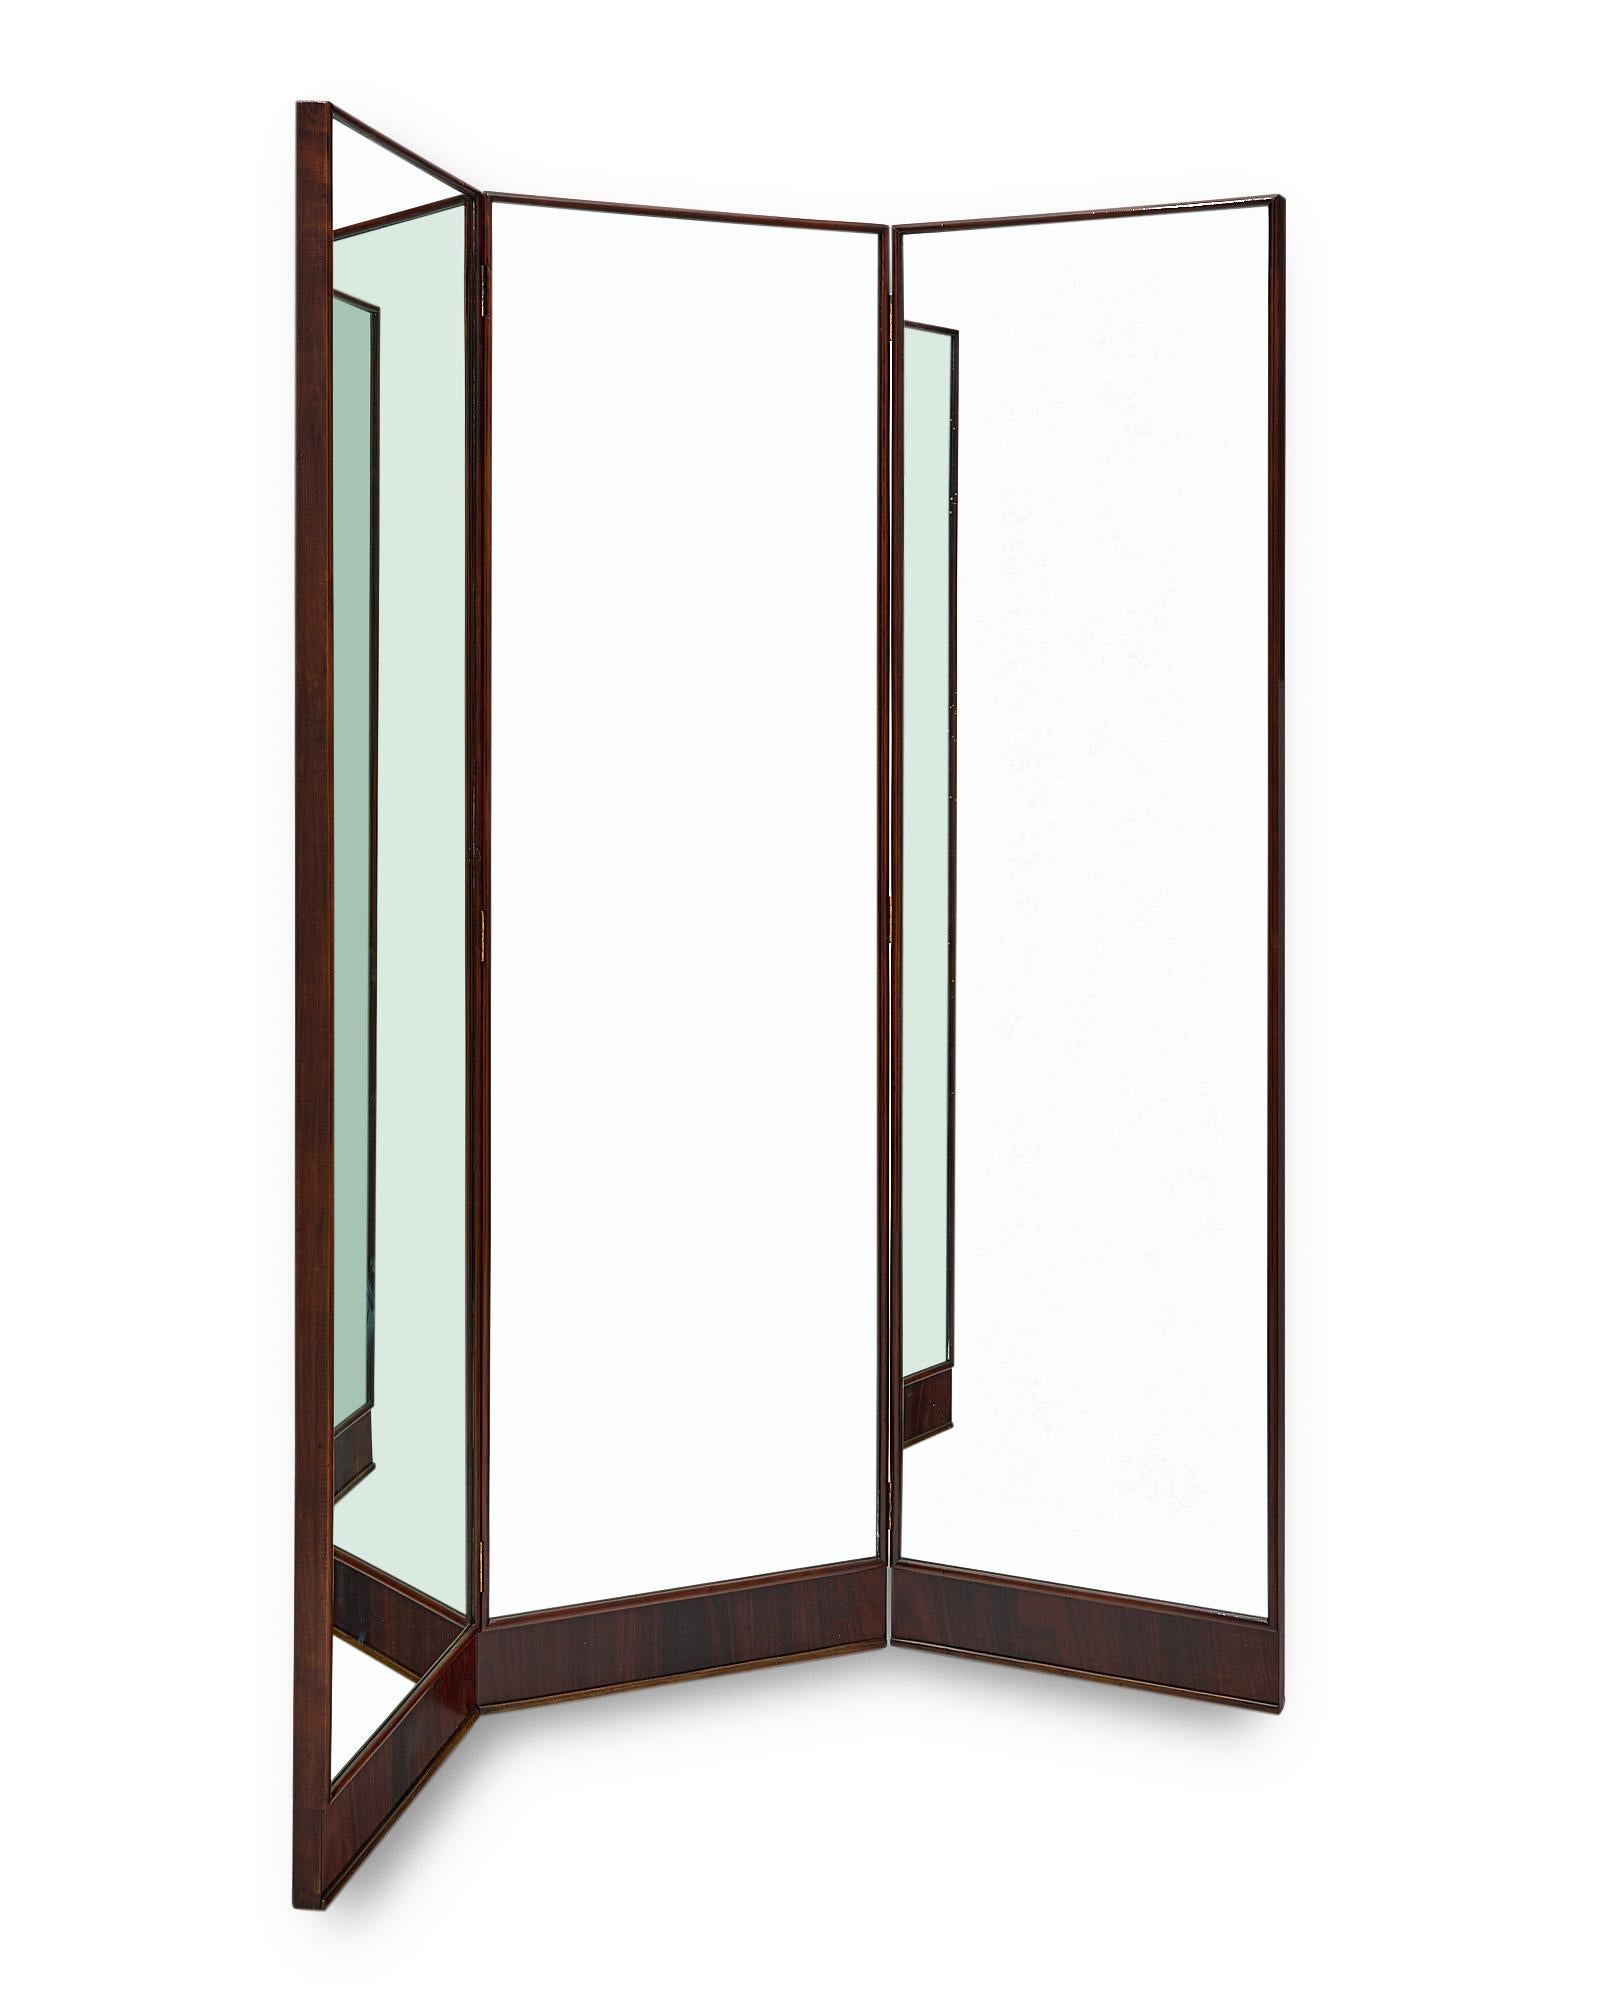 Screen, mirrored, Italian, from the Modernist era. This piece has three mirrors each framed in a solid rosewood structure and hinged together. The central panel is 20.5” in length, while each other panel is 19.25” in length.